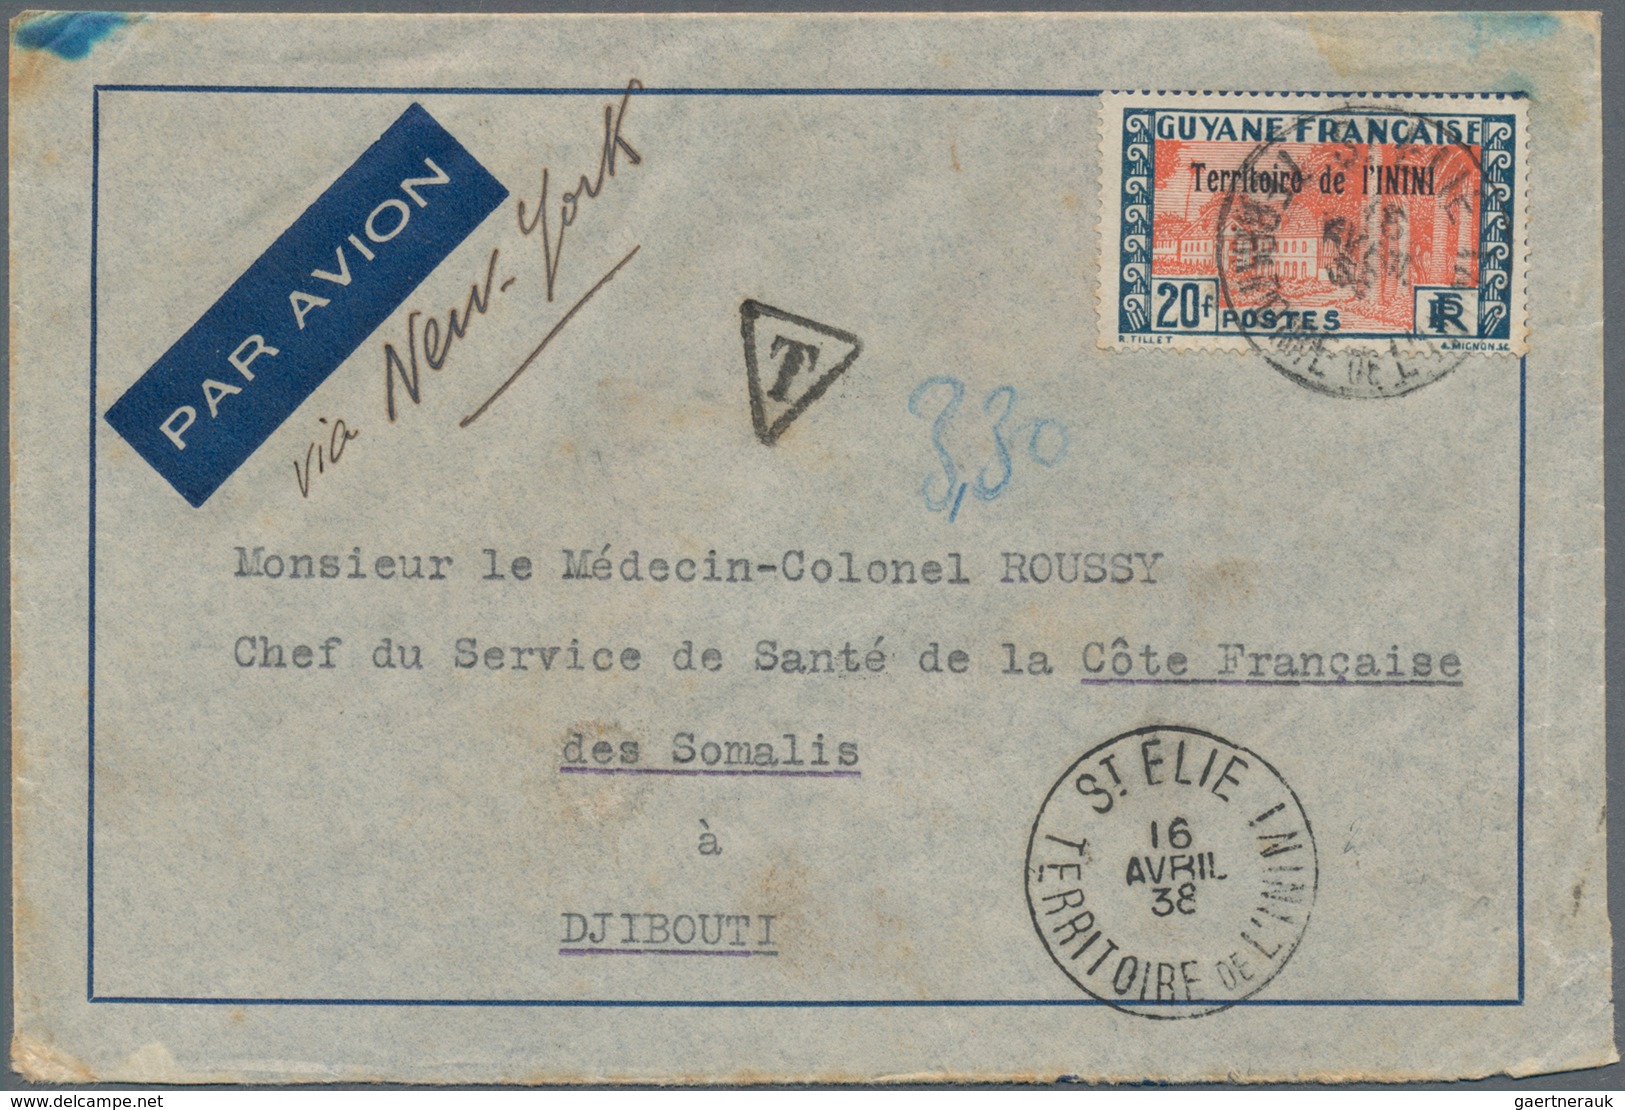 Inini: 1938, Printed Airmail Envelope Used From St. Elle, Inini To Djibouti, French Somali Coast Via - Covers & Documents